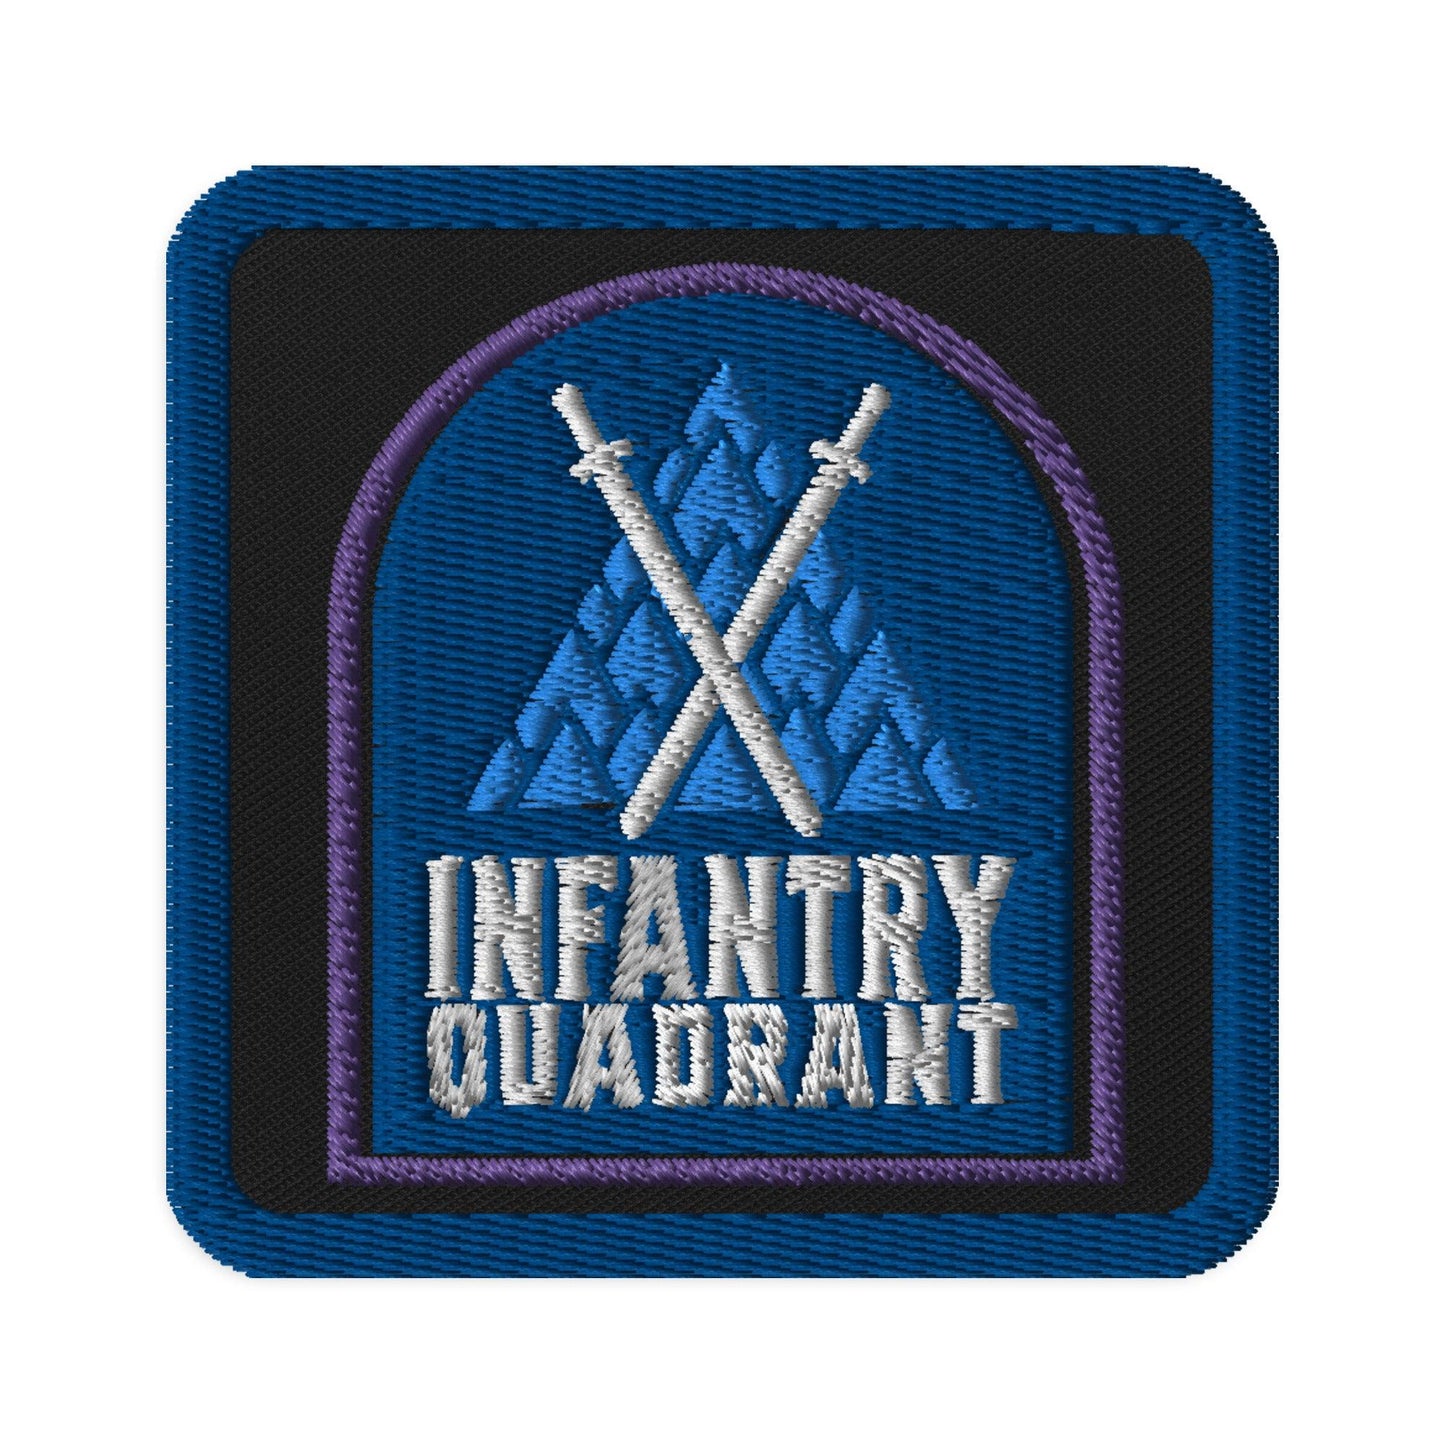 Infantry Quadrant Embroidered Patch - The Bean Workshop - embroidered, fourth wing, patch, rebecca yarros